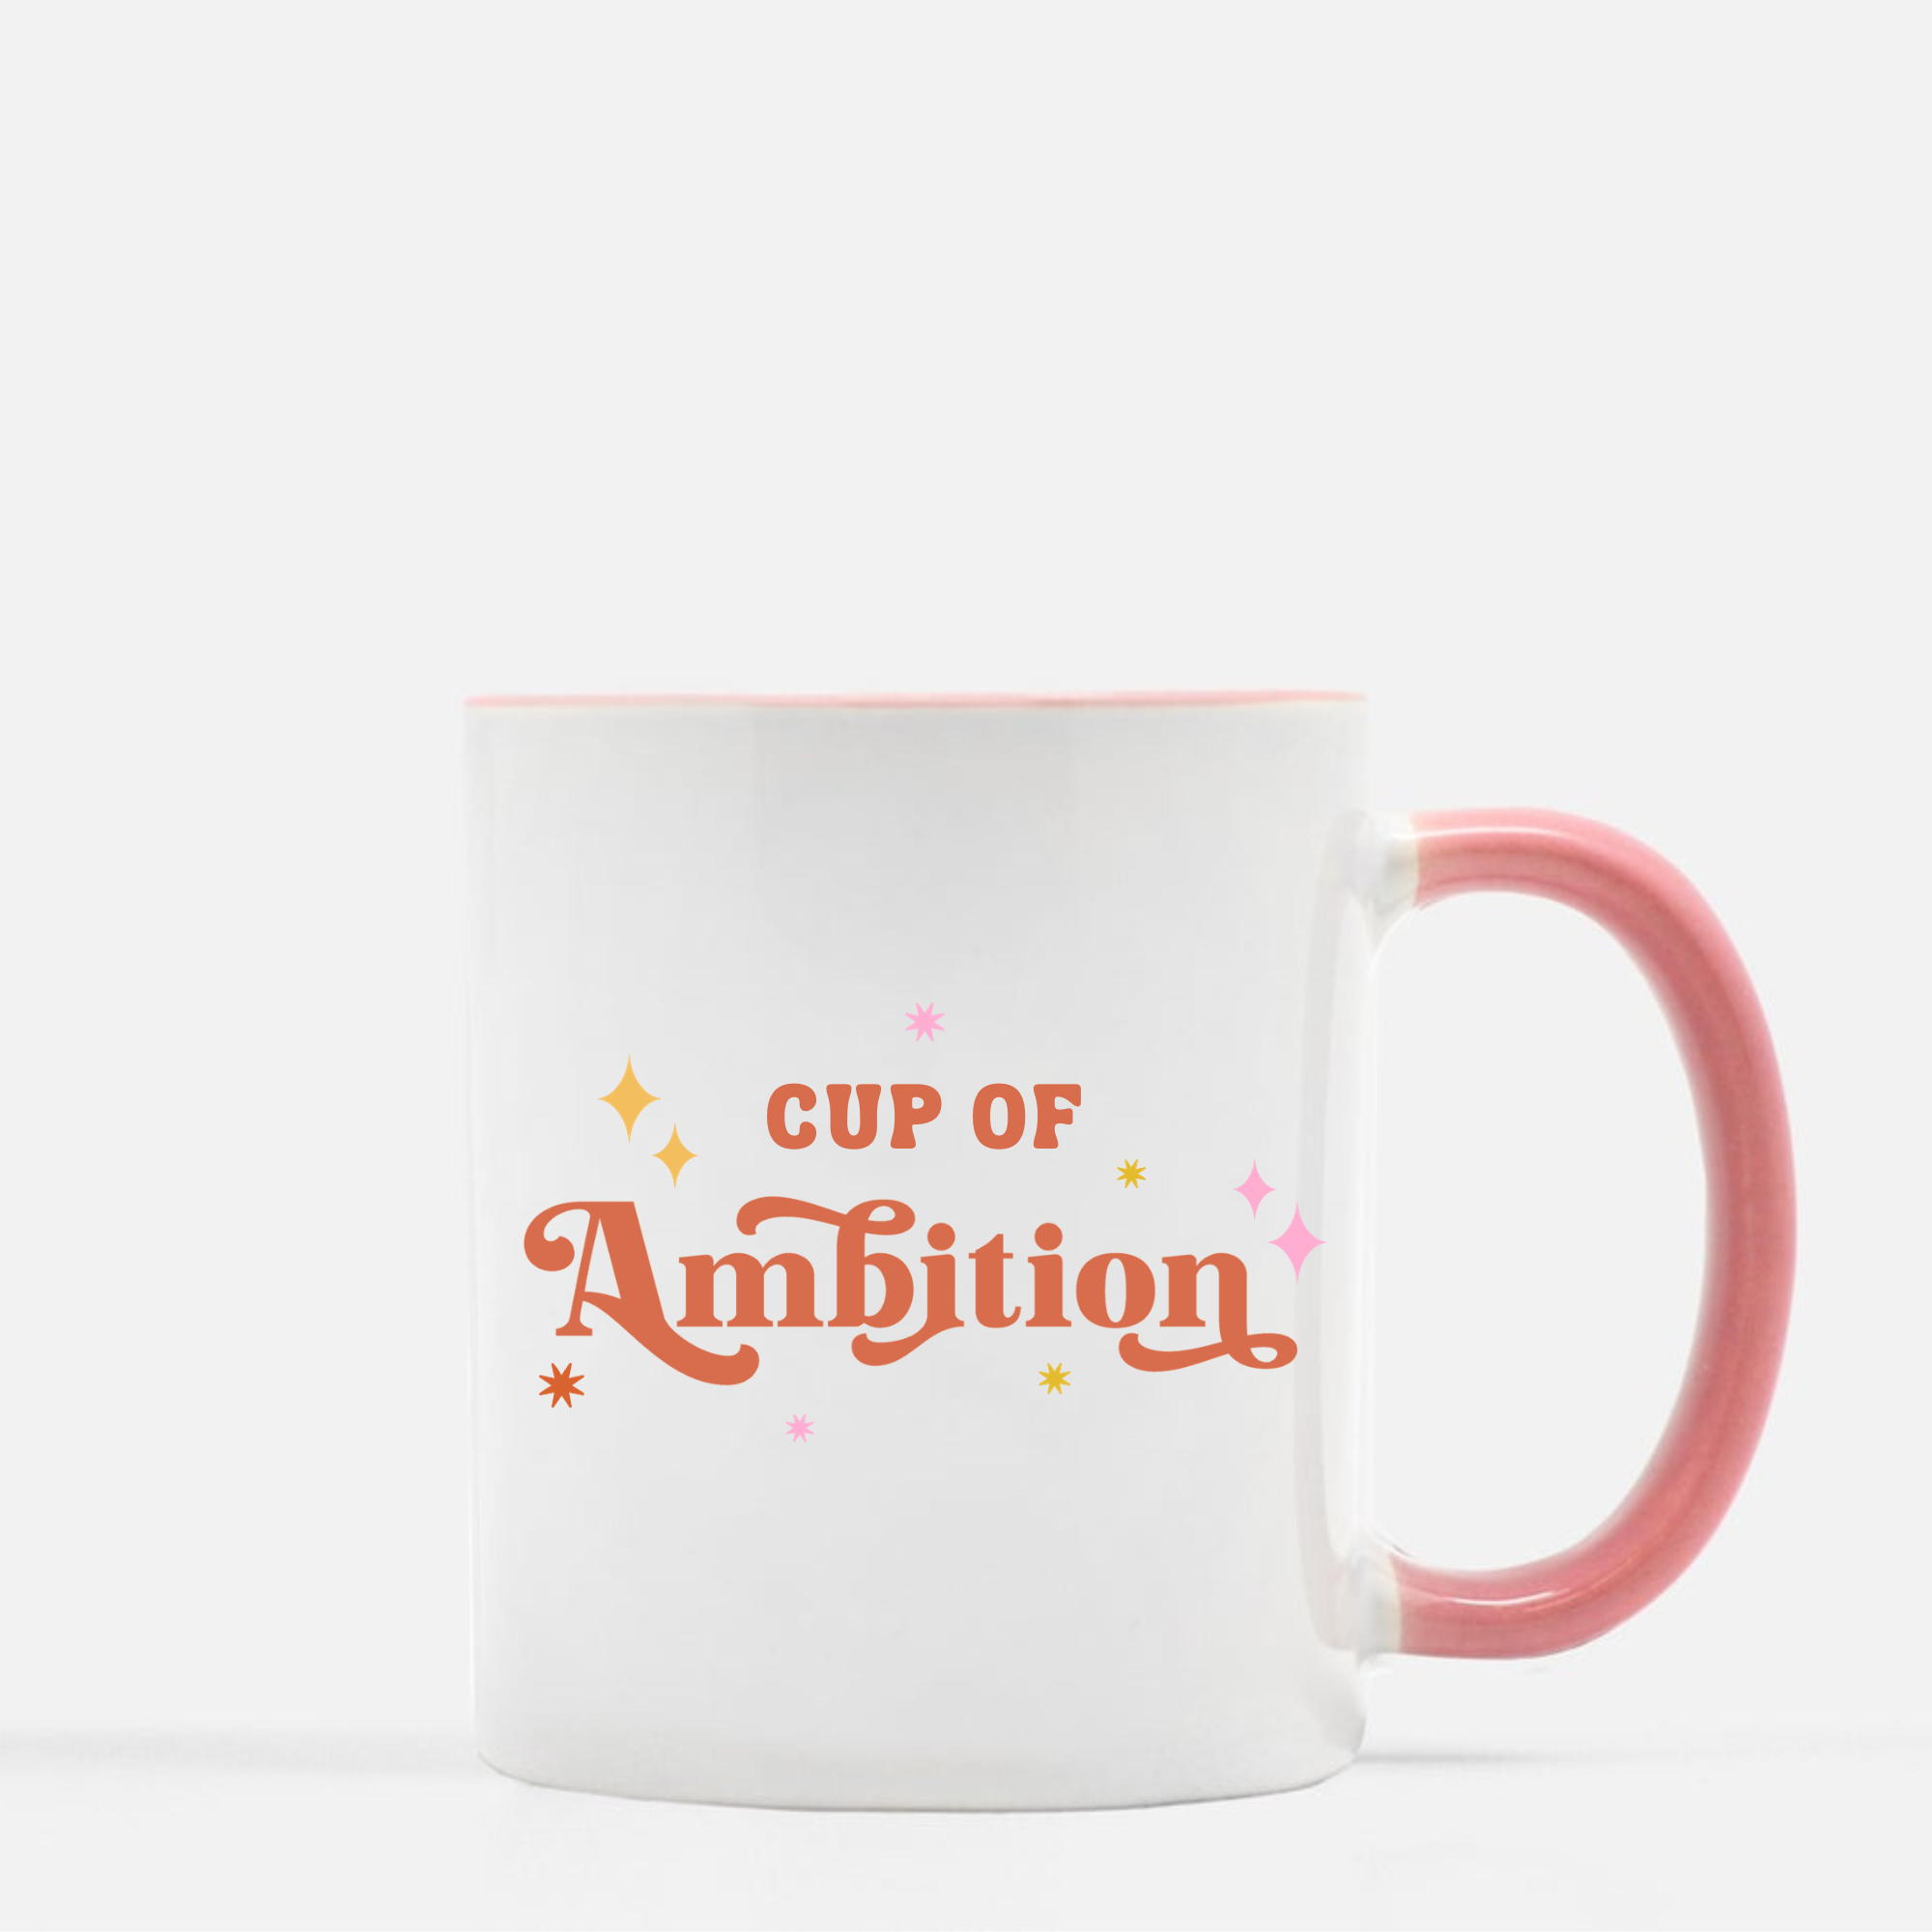 pour yourself a cup of ambition, coffee mug, retro inspired